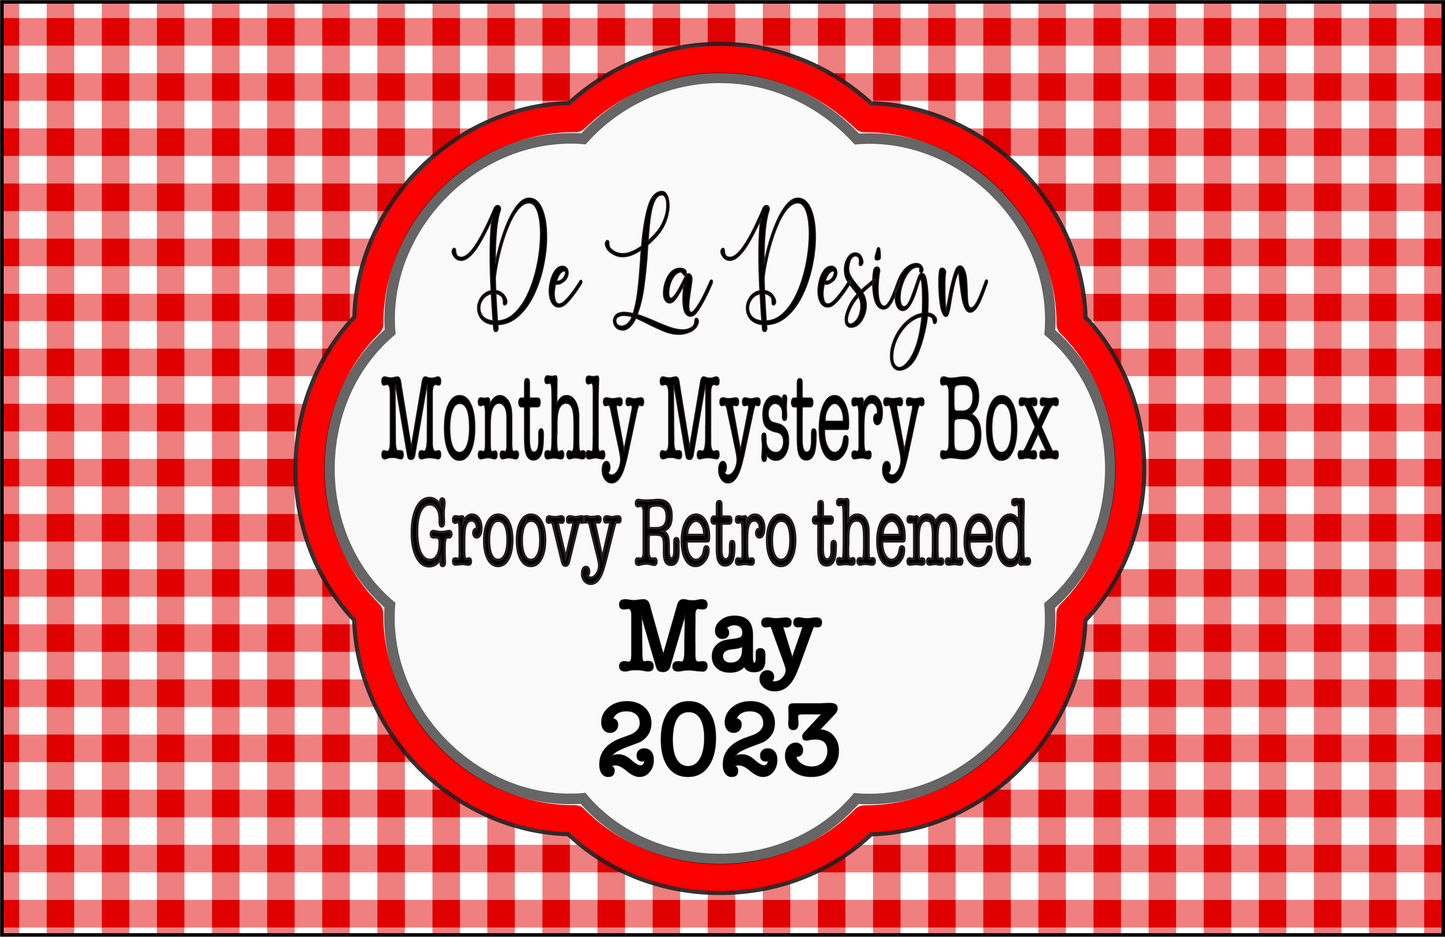 Monthly Mystery Box - May 2023 - Groovy Retro themed